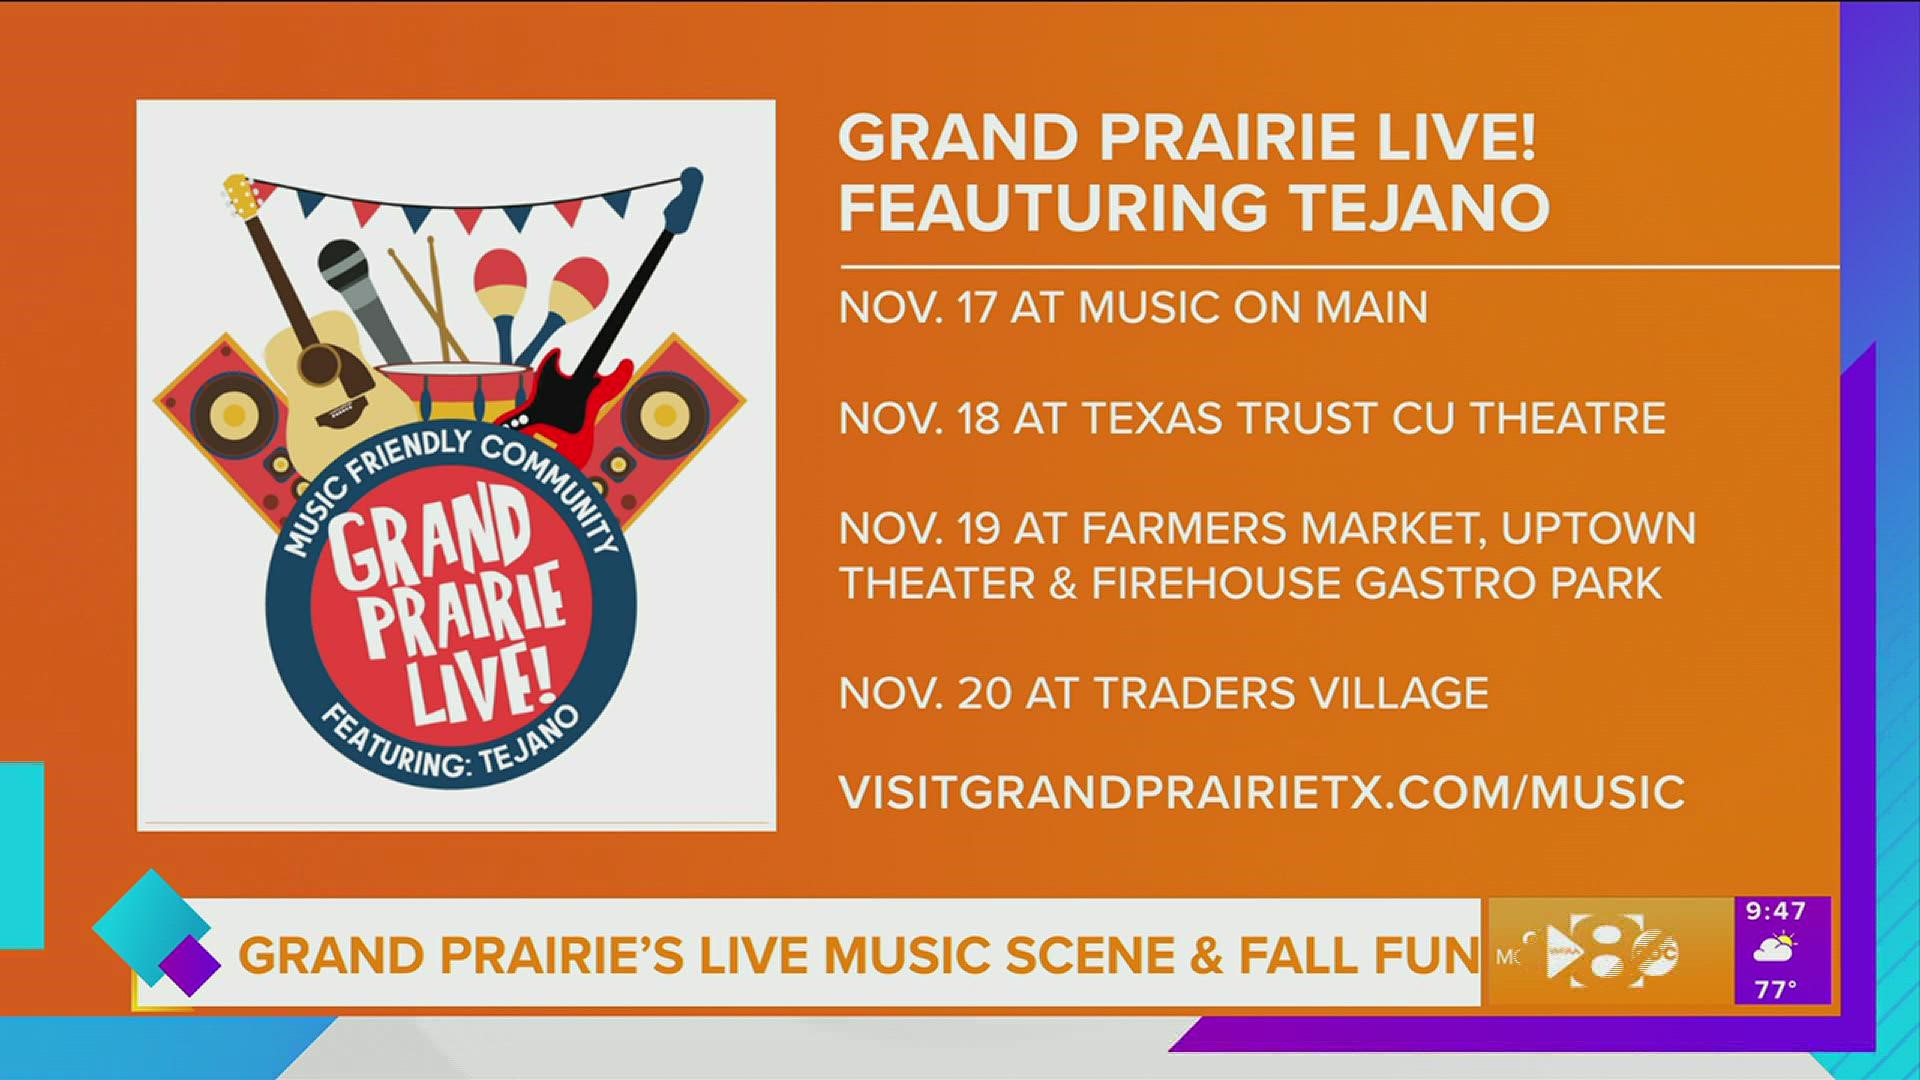 This segment is sponsored by City of Grand Prairie.